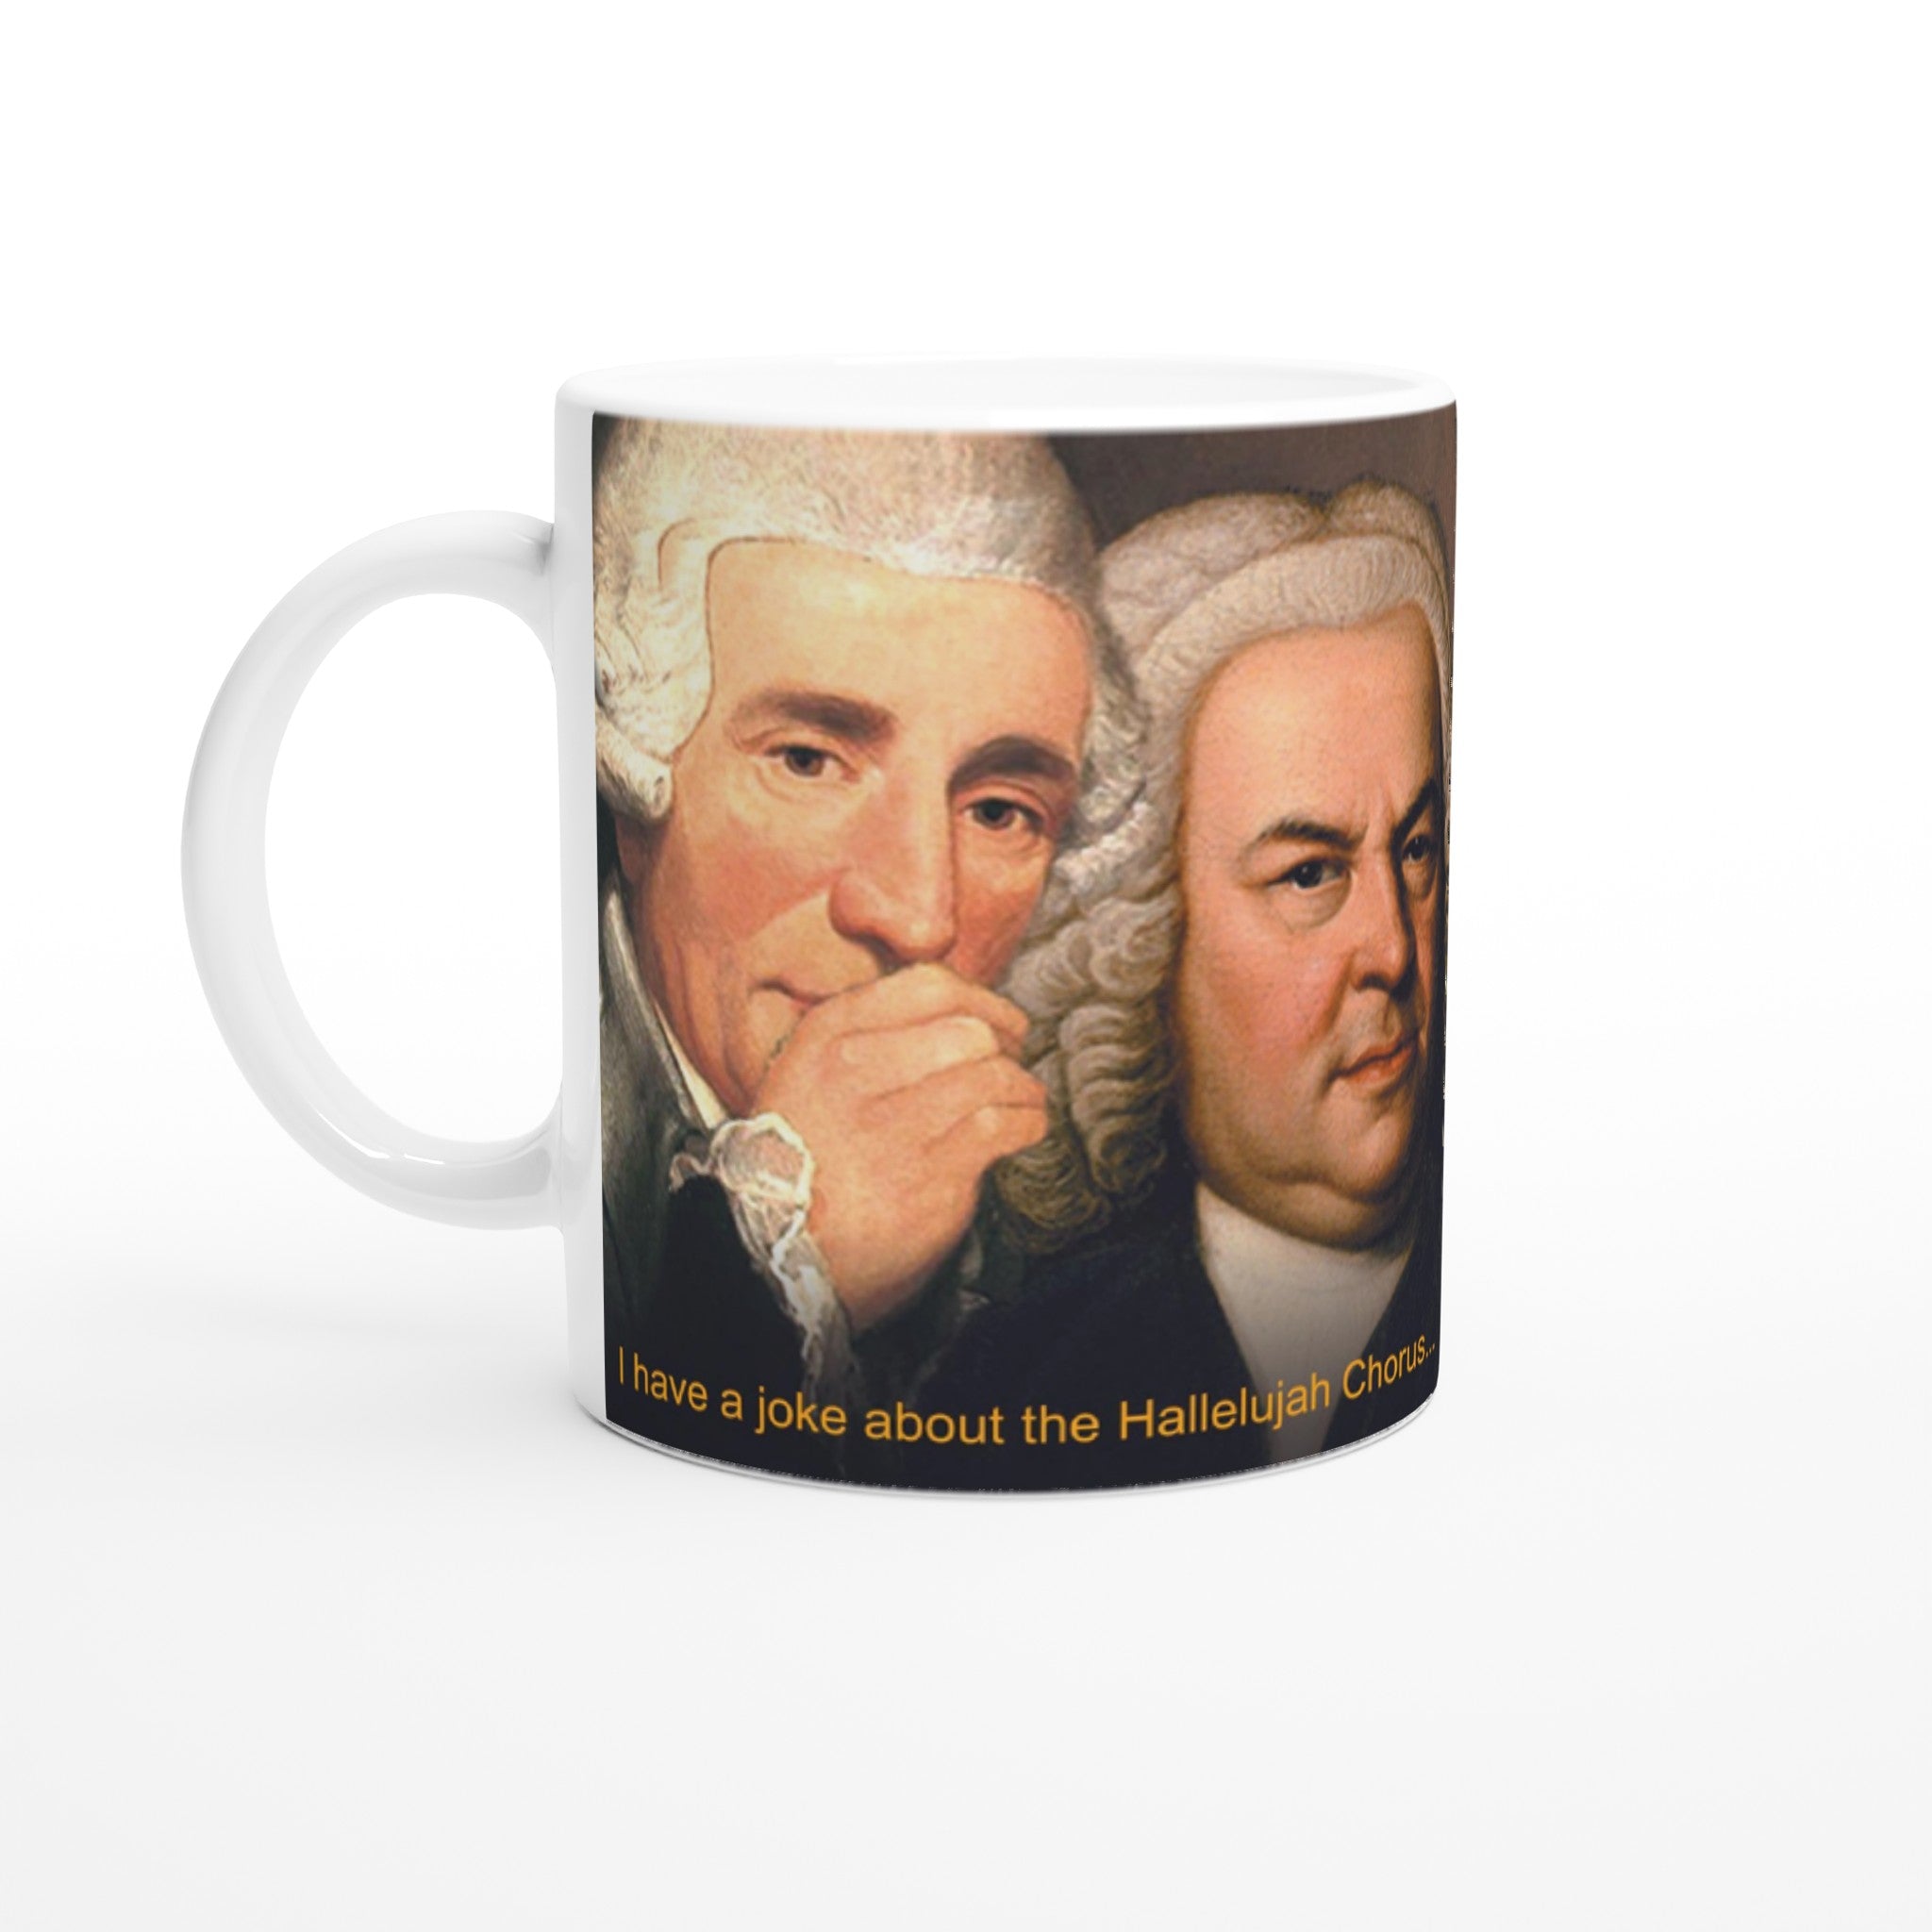 I have a joke about the Hallelujah Chorus, but you can't Handel it. - 11oz Ceramic Mug